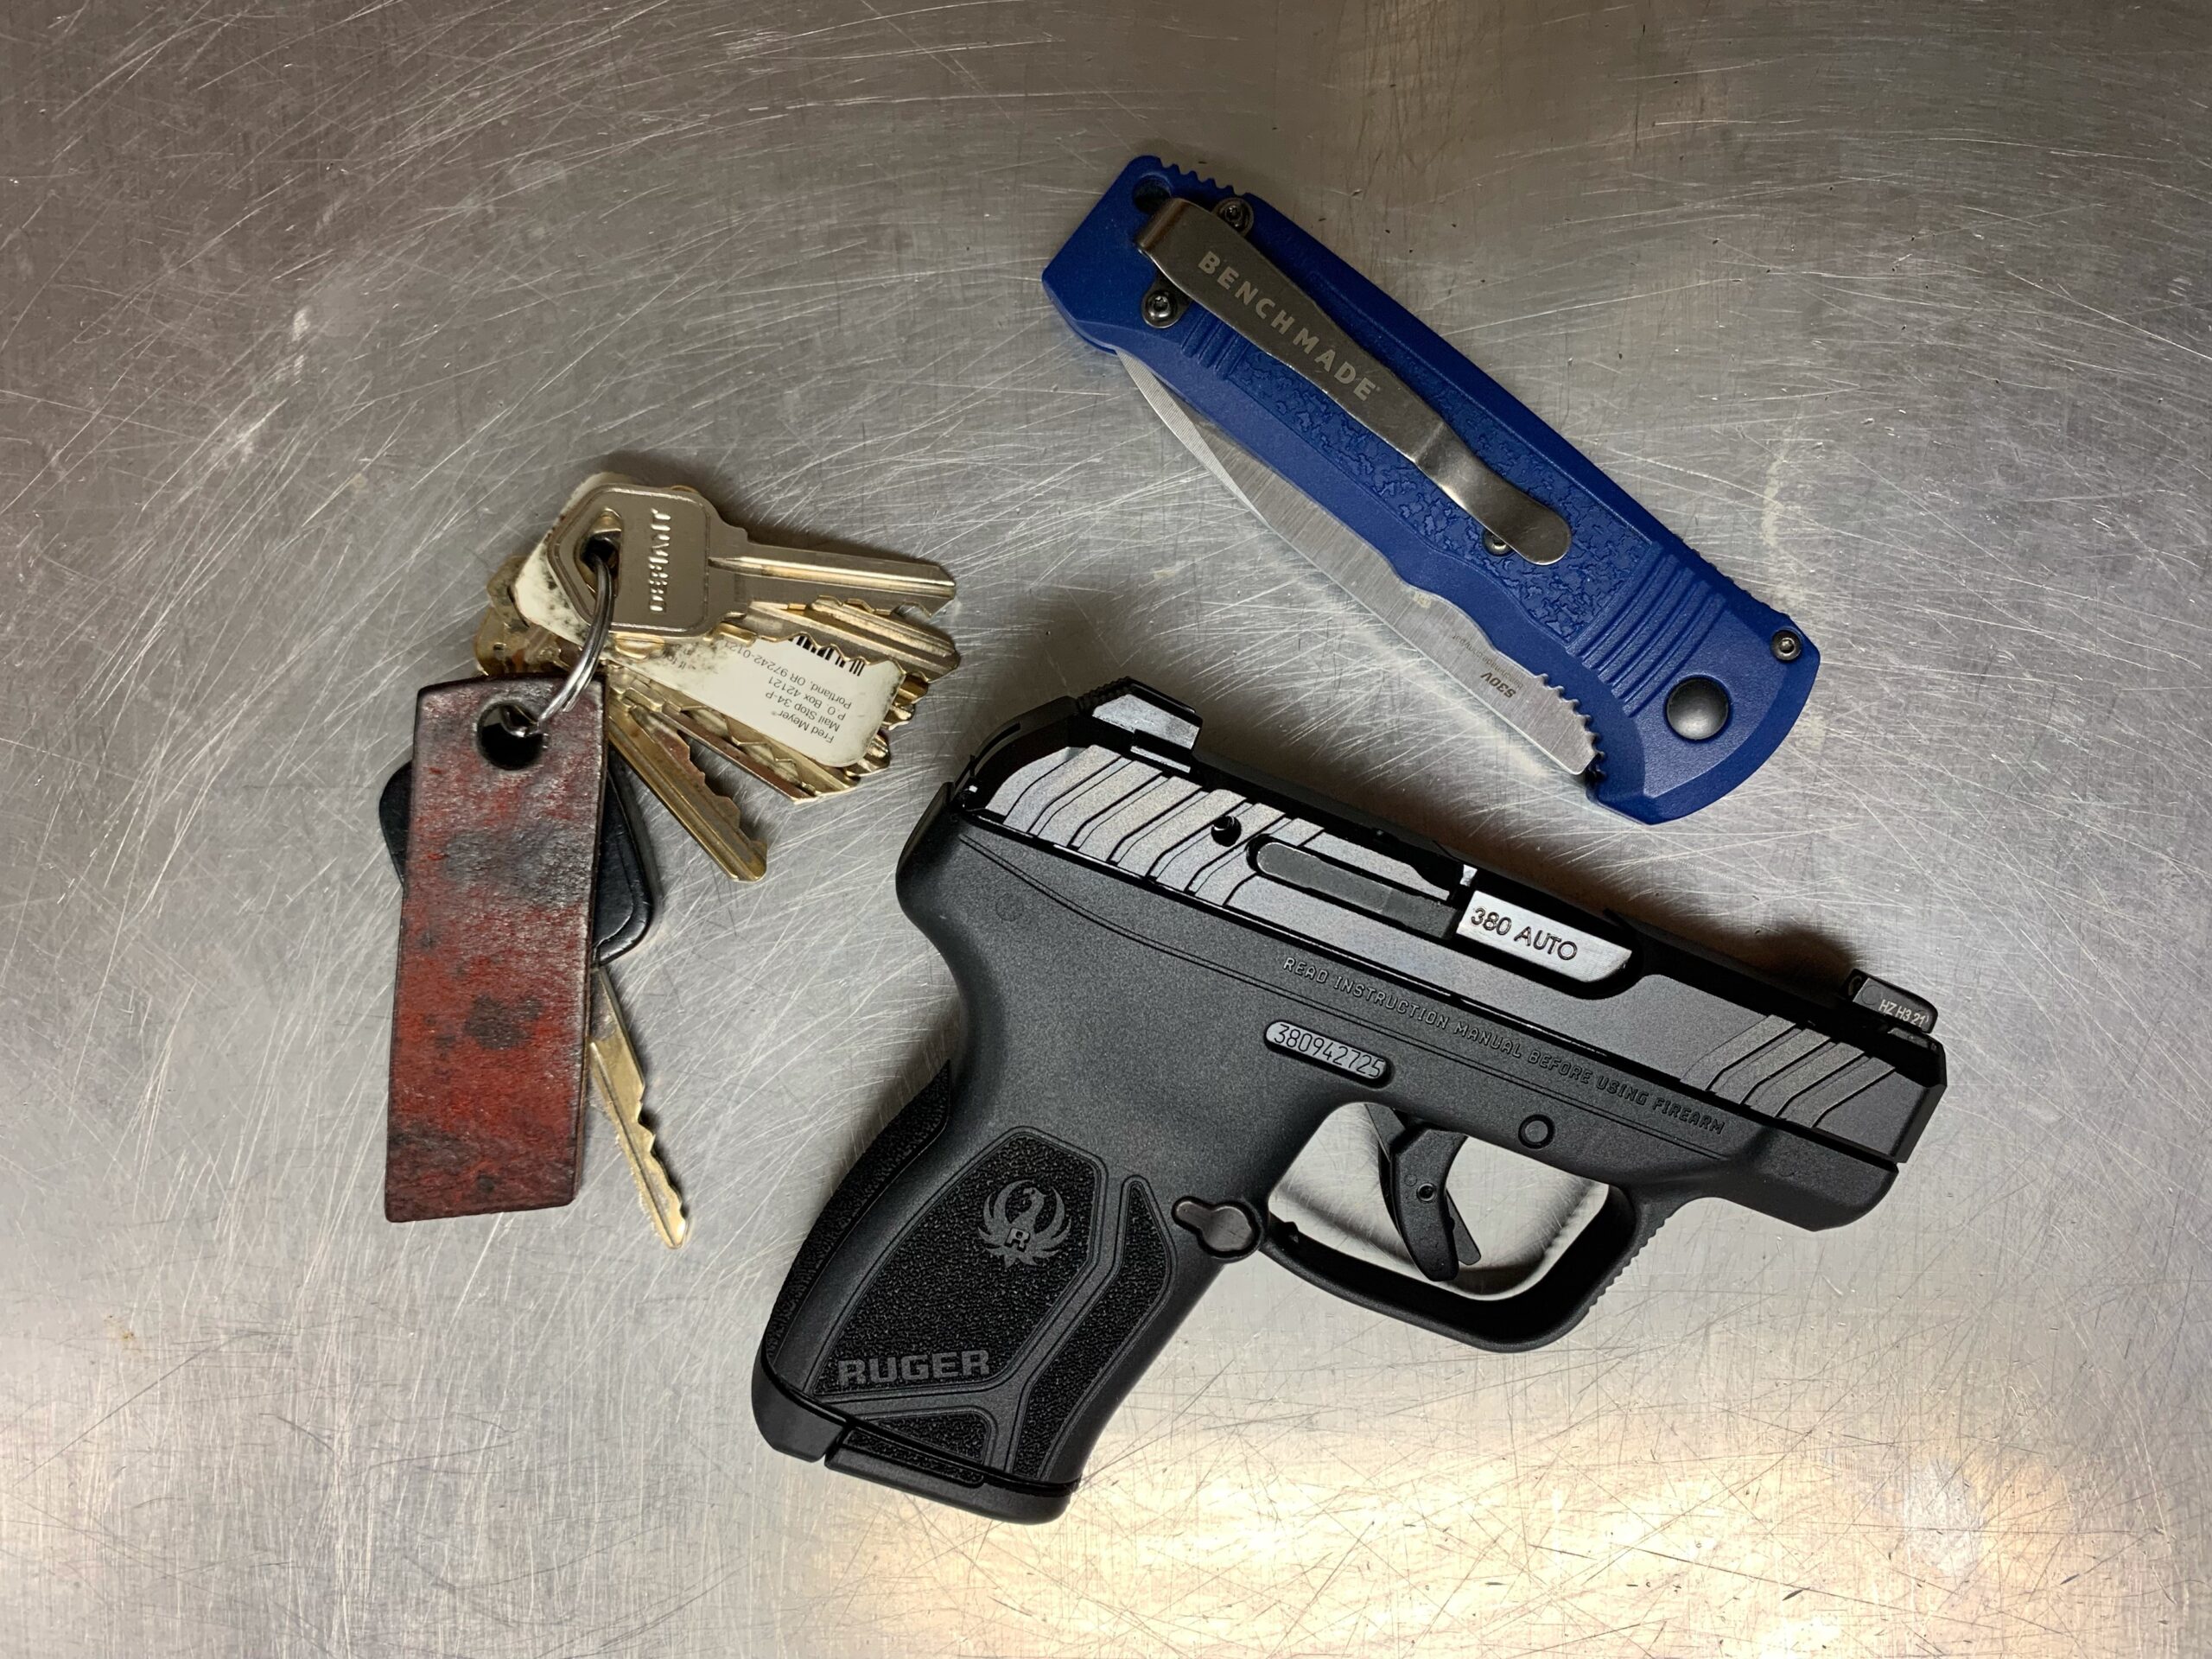 Ruger LCP .380 Review - The Go To Concealed Carry Pistol